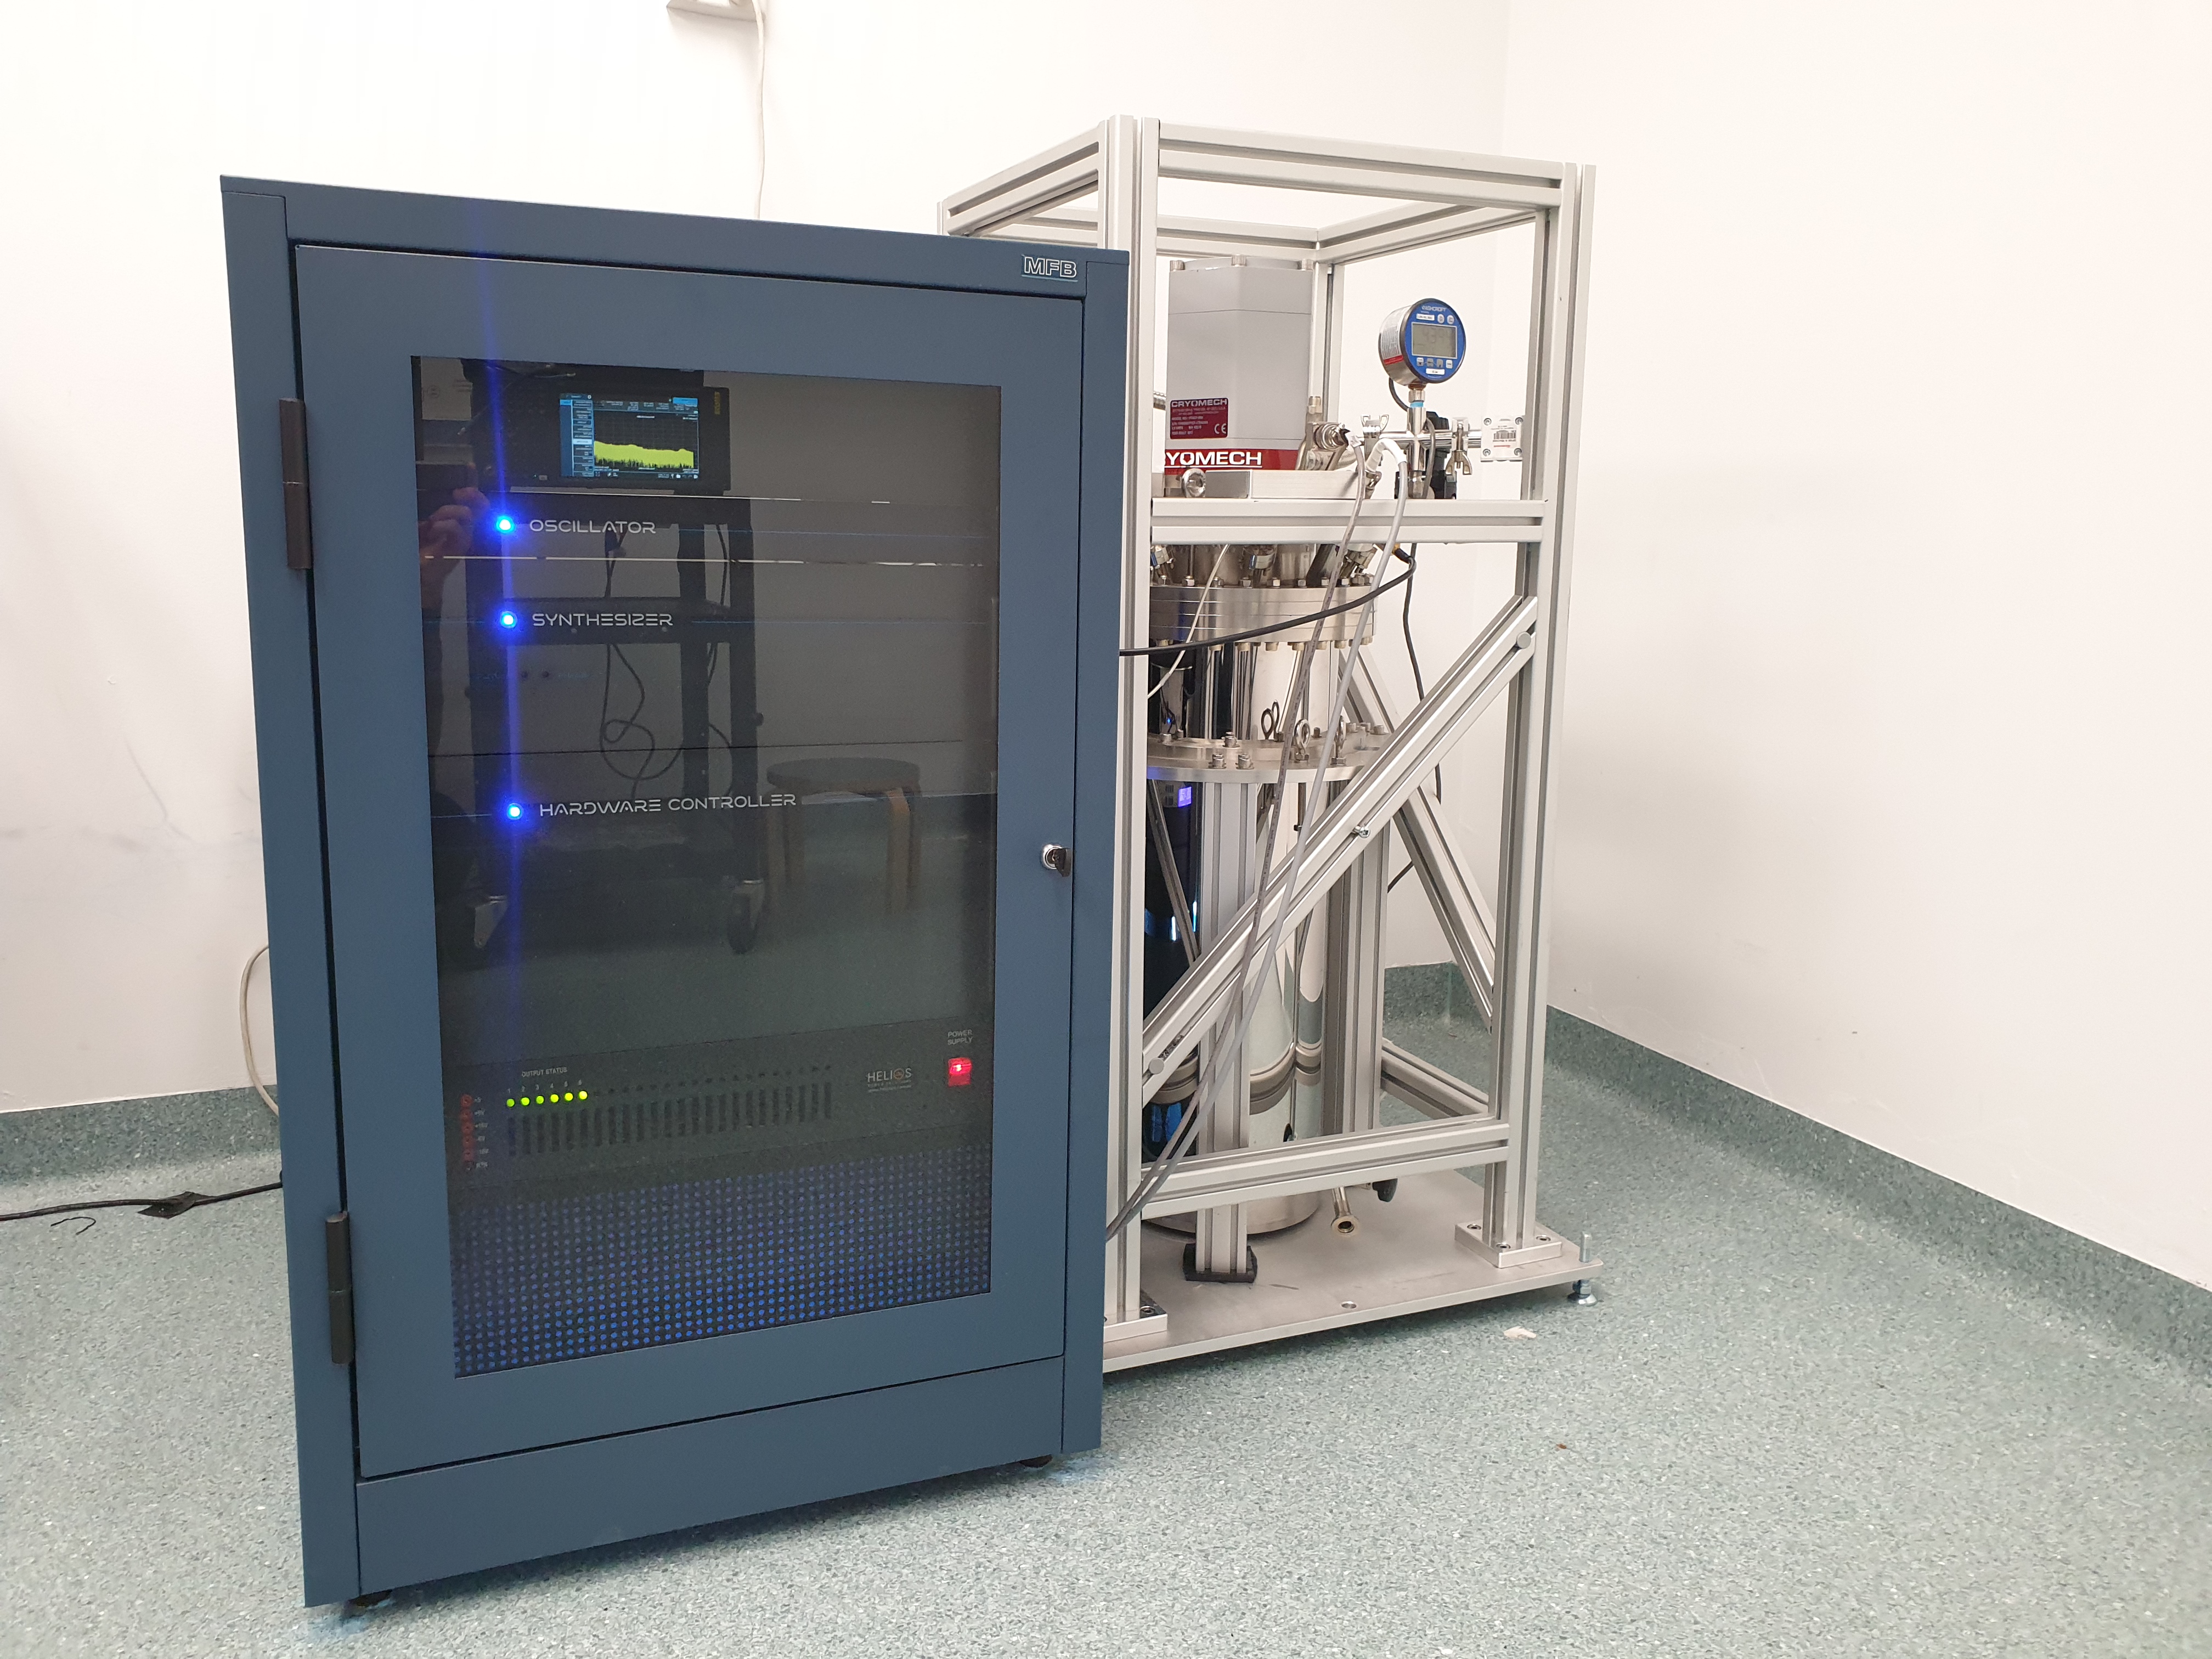 QuantX Labs, an Australian deep technology company, has achieved a groundbreaking advancement with its cryogenic sapphire oscillator, the Cryoclock. Operating at microwave frequencies, it offers unparalleled signal purity and stability, attracting interest from defense and commercial markets while also spearheading the development of advanced quantum technology for space applications.